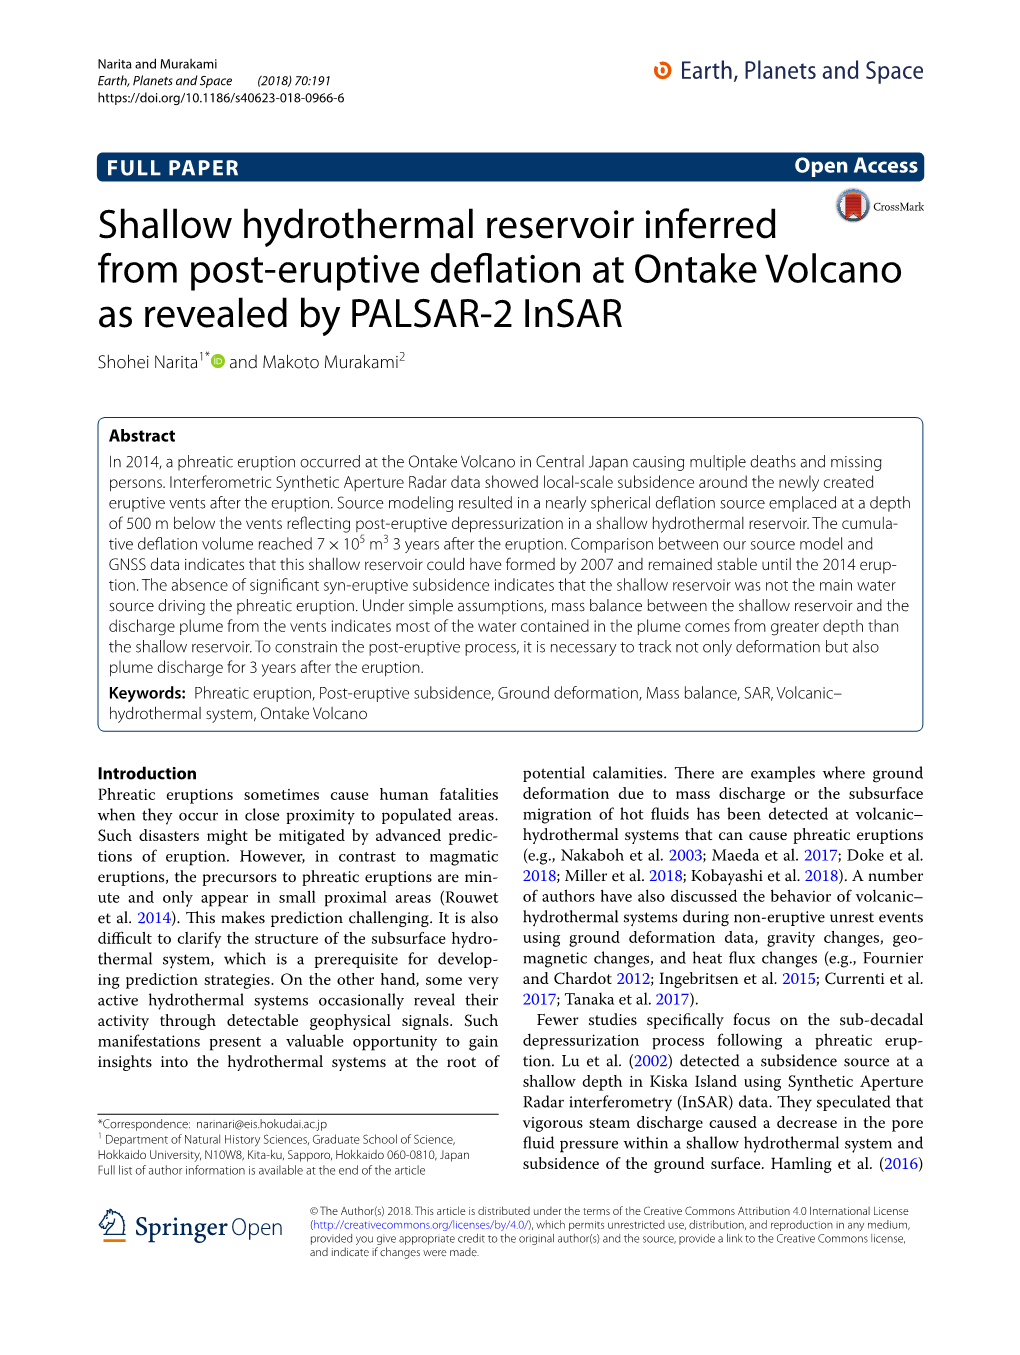 Shallow Hydrothermal Reservoir Inferred from Post-Eruptive Deflation